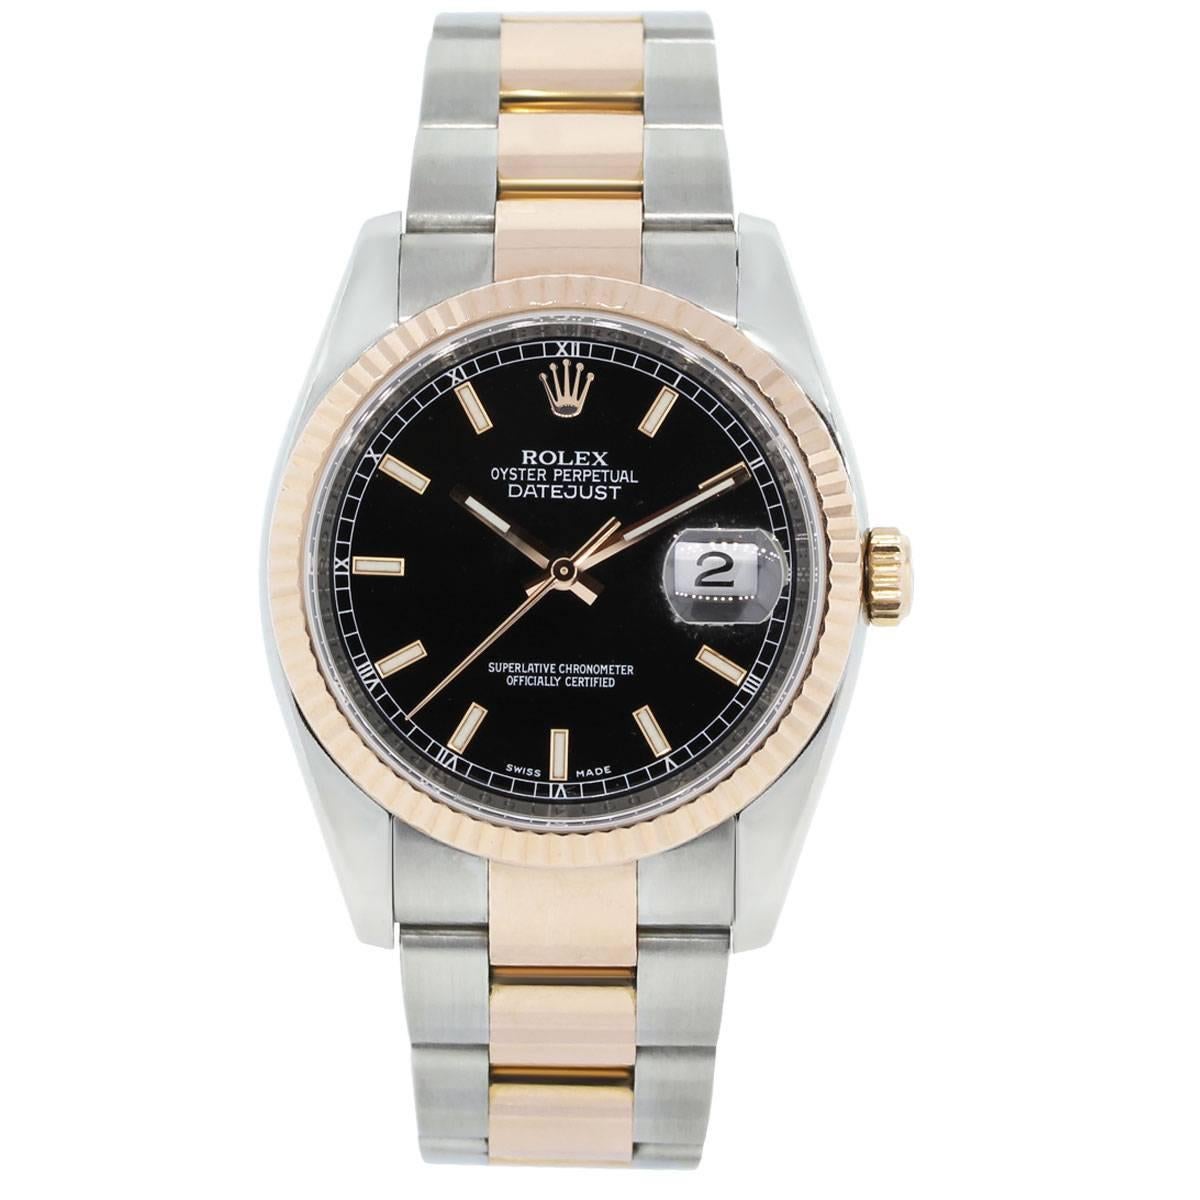 Brand: Rolex
MPN: 116231
Model: Datejust
Case Material: stainless steel
Case Diameter: 36mm
Crystal: Sapphire crystal
Bezel: 18k rose gold fluted bezel
Dial: Black dial with rose gold outlined luminescent hour markers, rose gold hands and date